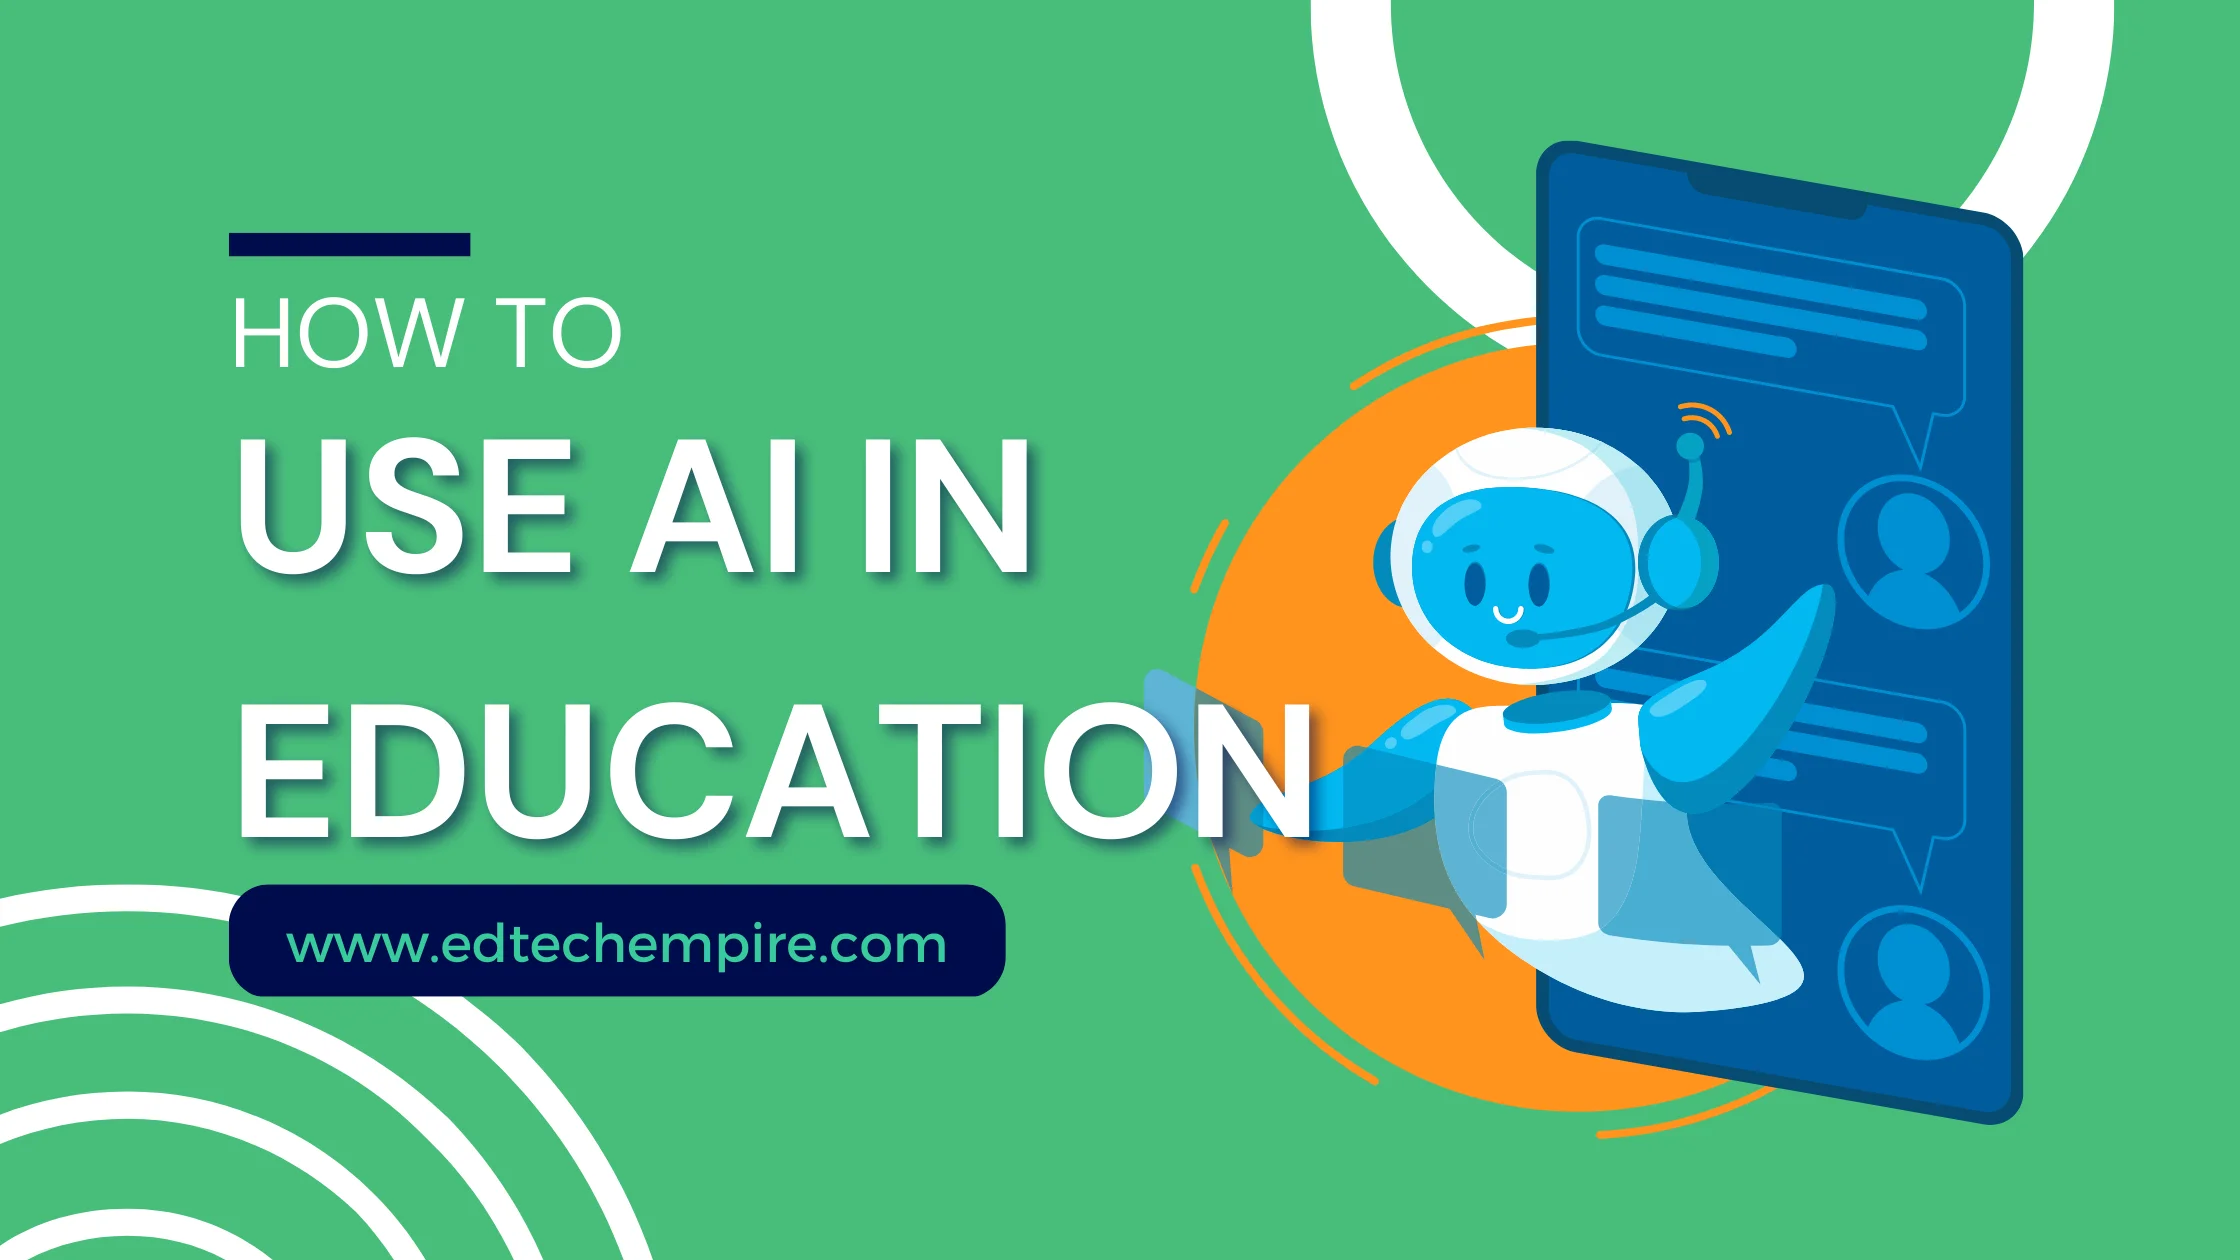 How to Use AI in Education